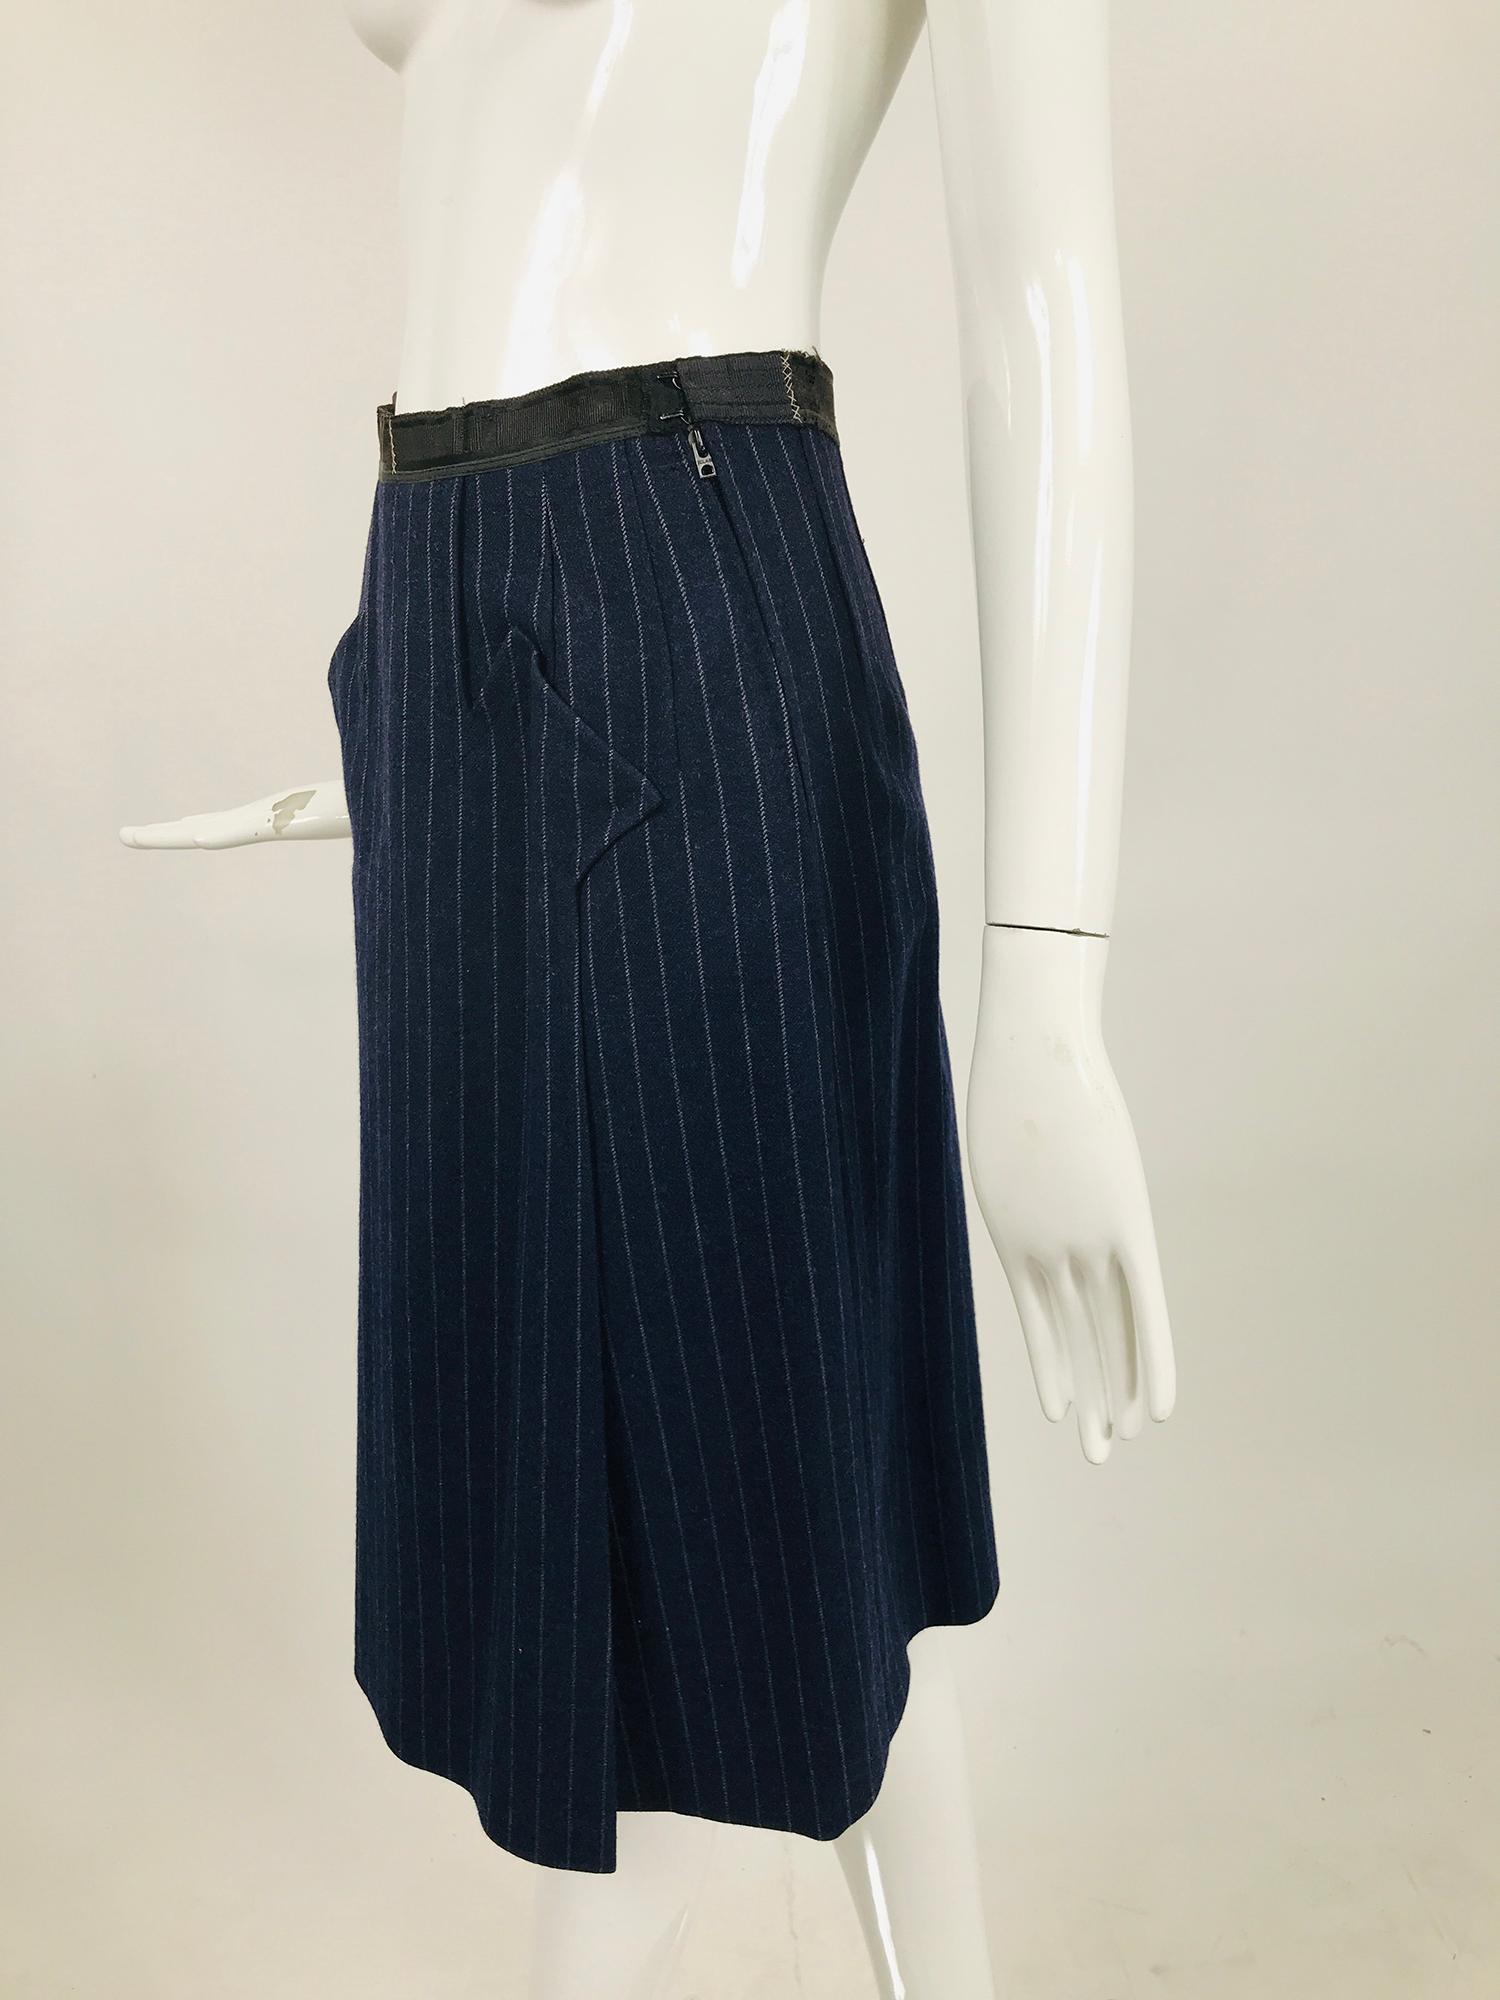 Vintage Maggy Rouff Couture Pin Stripe Skirt Suit Early 1950s For Sale ...